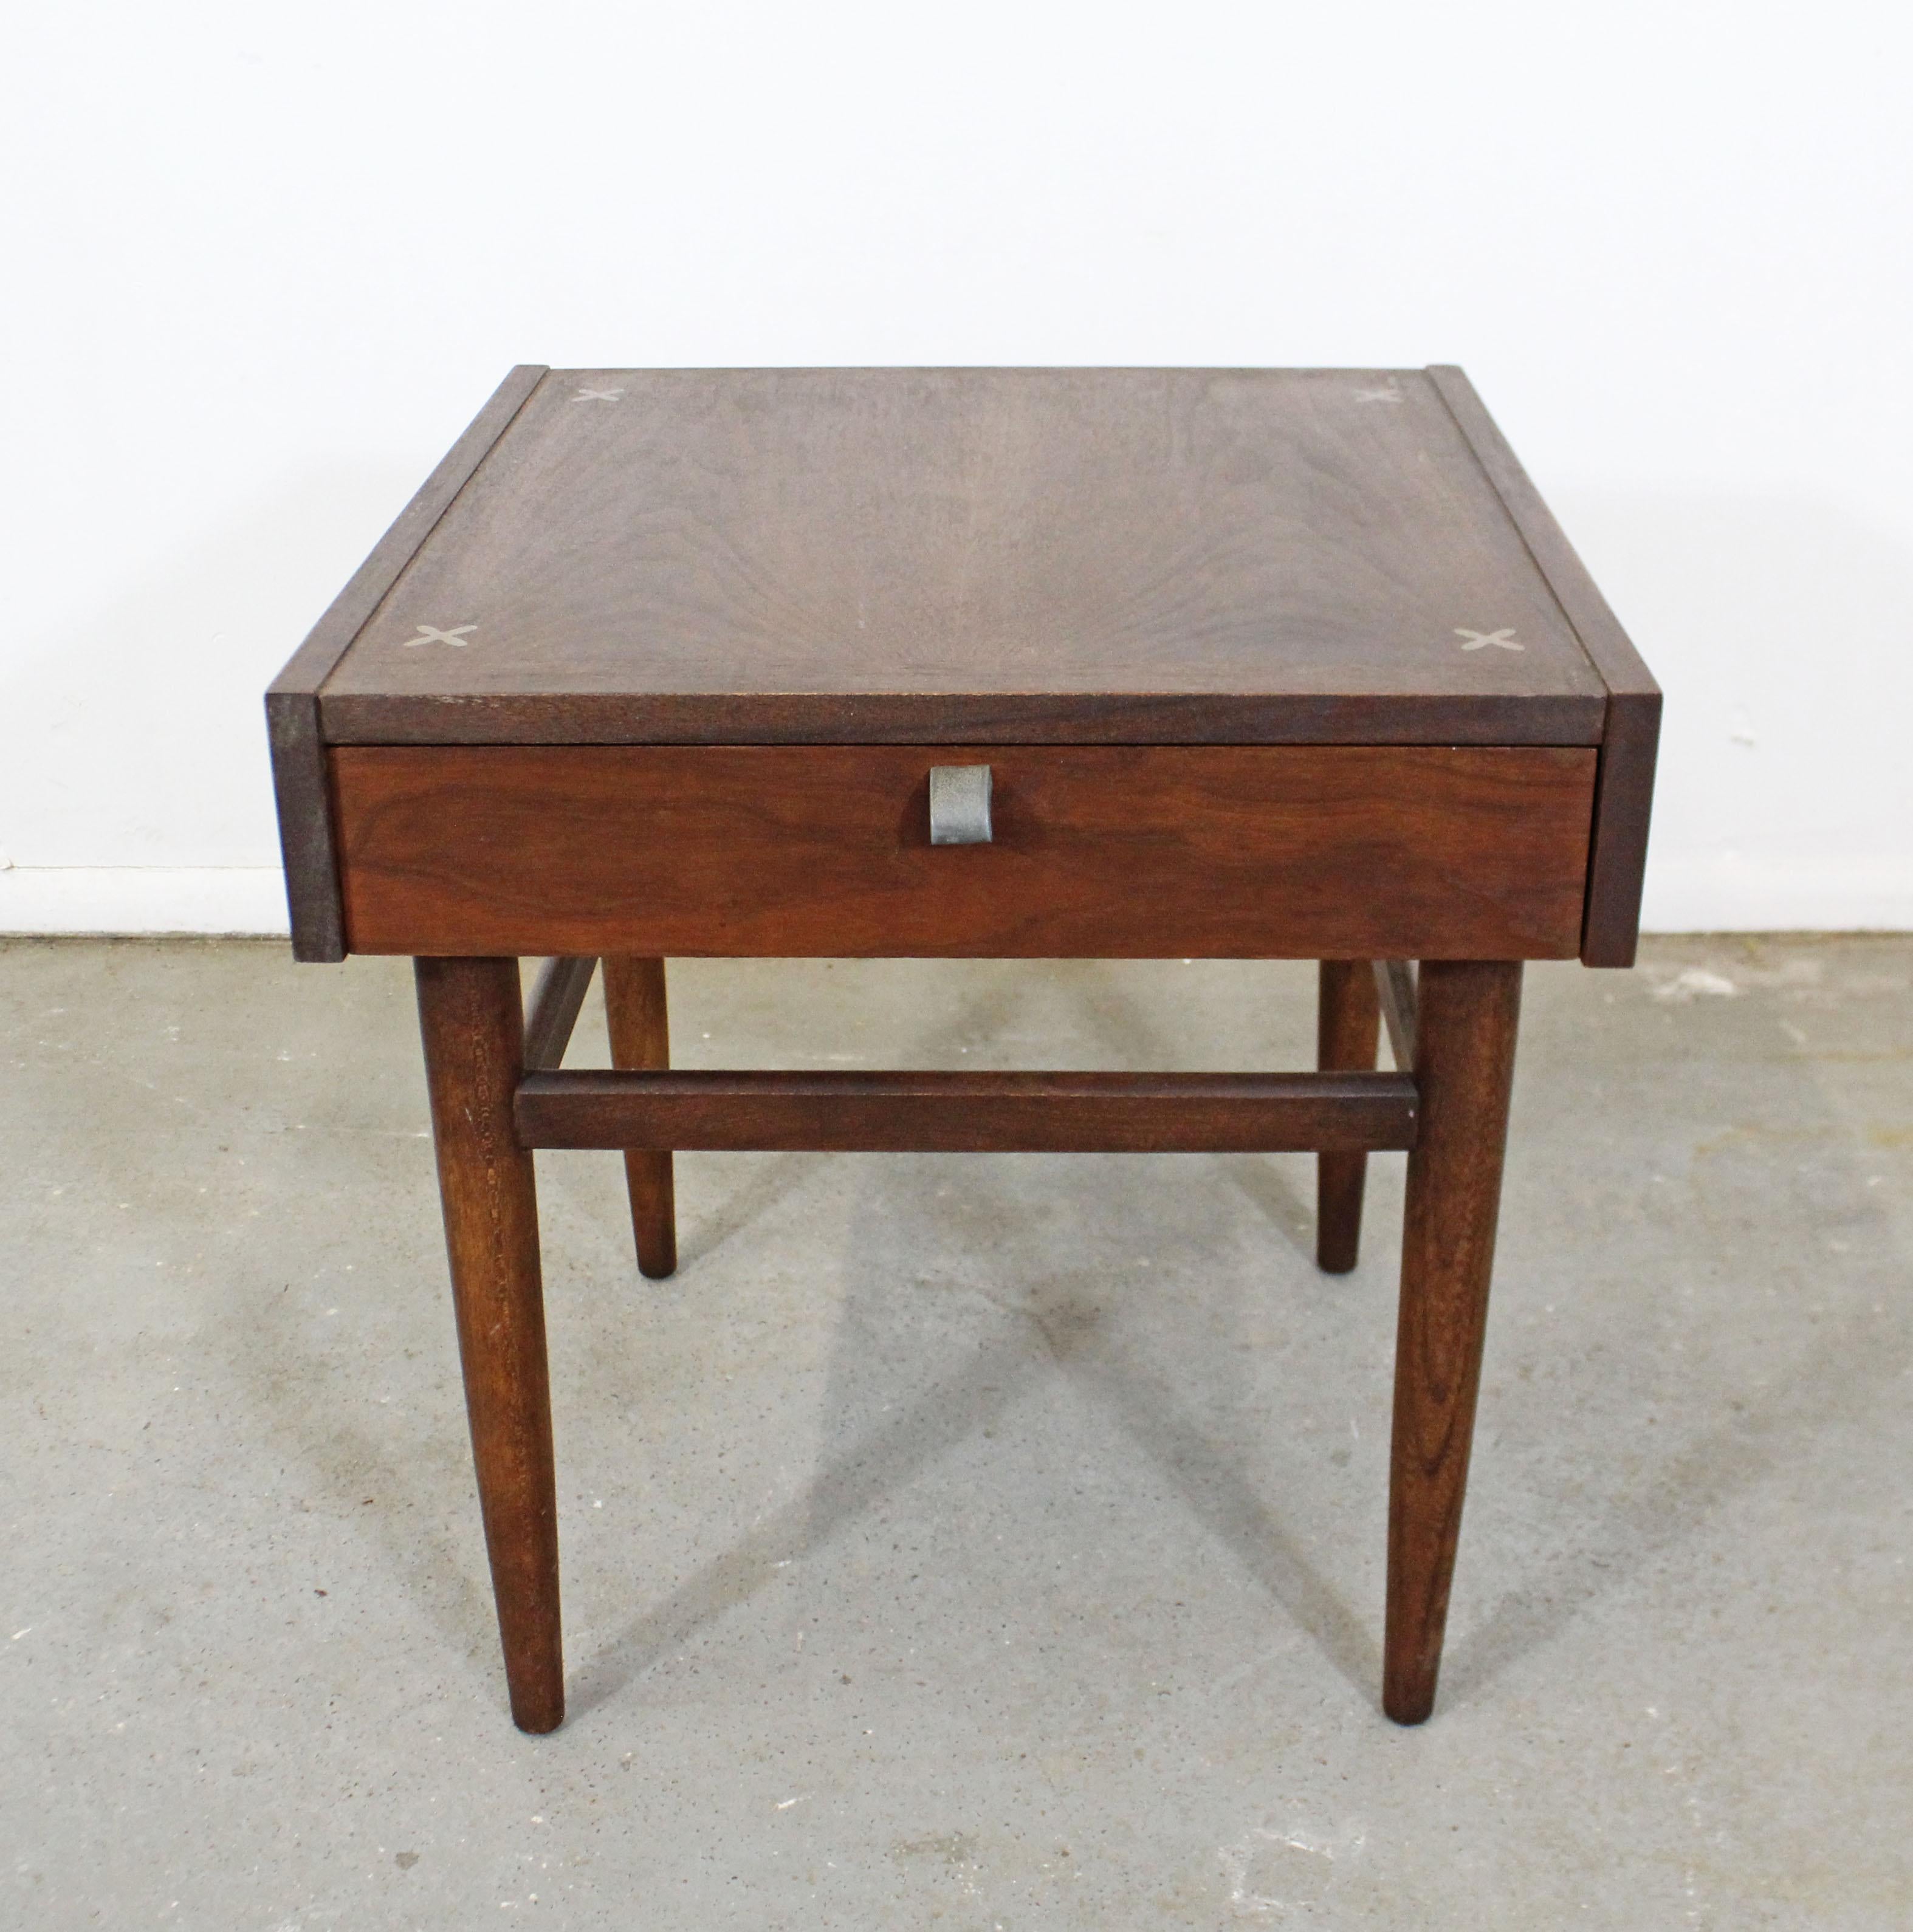 Offered is a walnut end table designed by Merton L. Gershun for American of Martinsville. Features one drawer with a brass pull and the iconic X-shaped brushed aluminium inlaid detailing in the tabletop. It is in good vintage condition, shows some